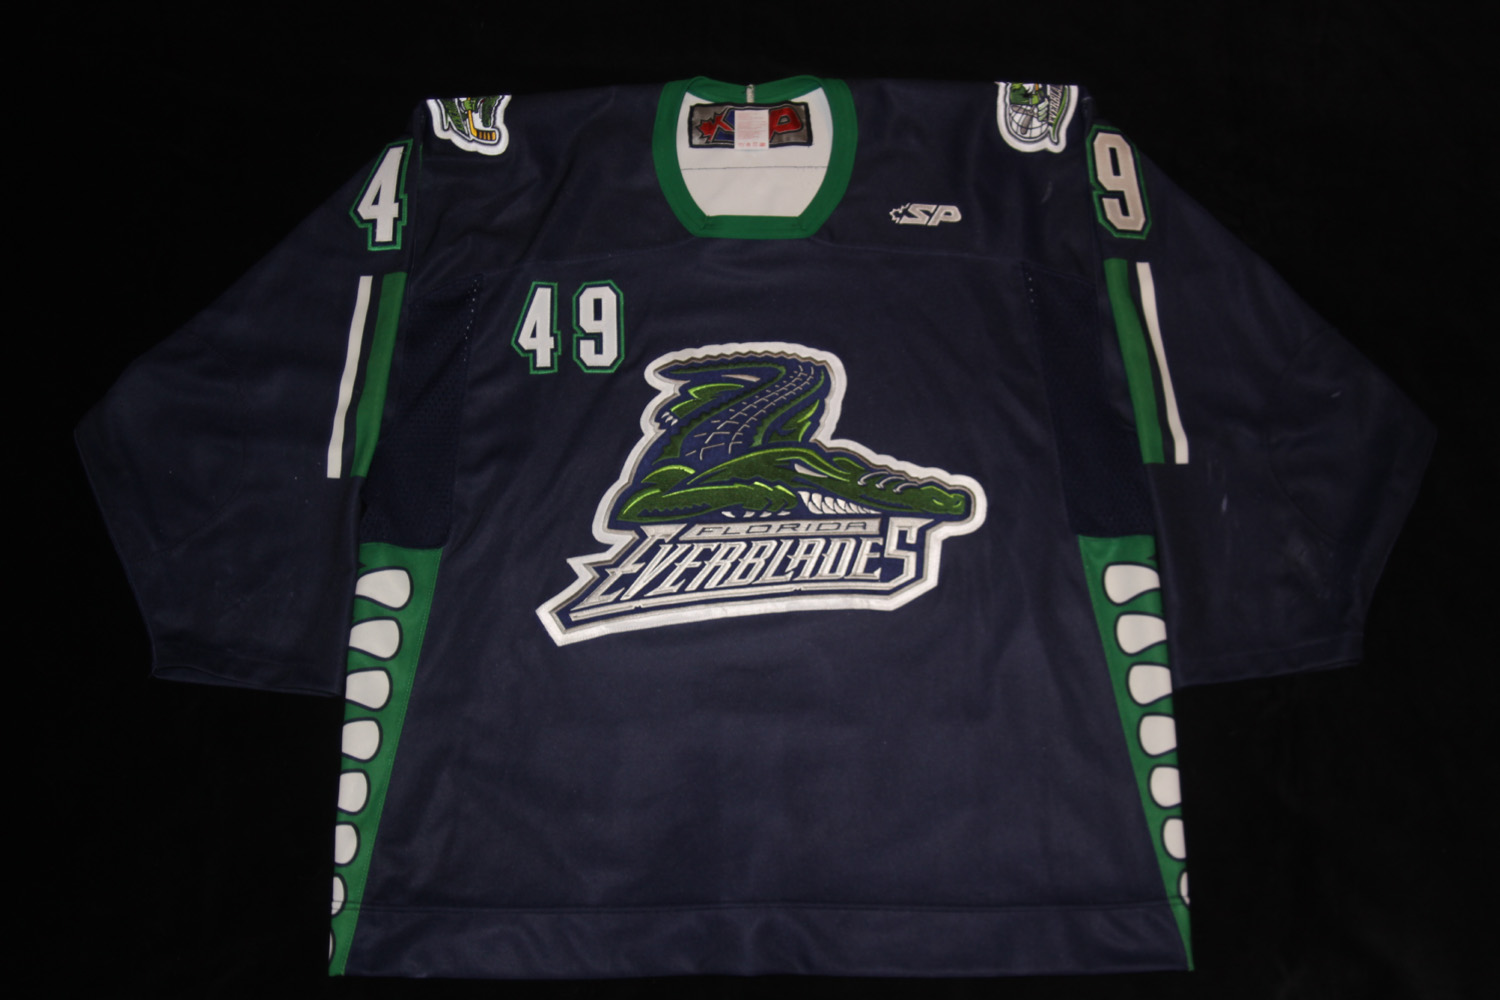 ECHL - Jacksonville Icemen host Florida Everblades tonight for Marvel Super  Hero Night! The Icemen will wear specialty Thor jerseys while the  Everblades will don Hulk jerseys. Want to win one of